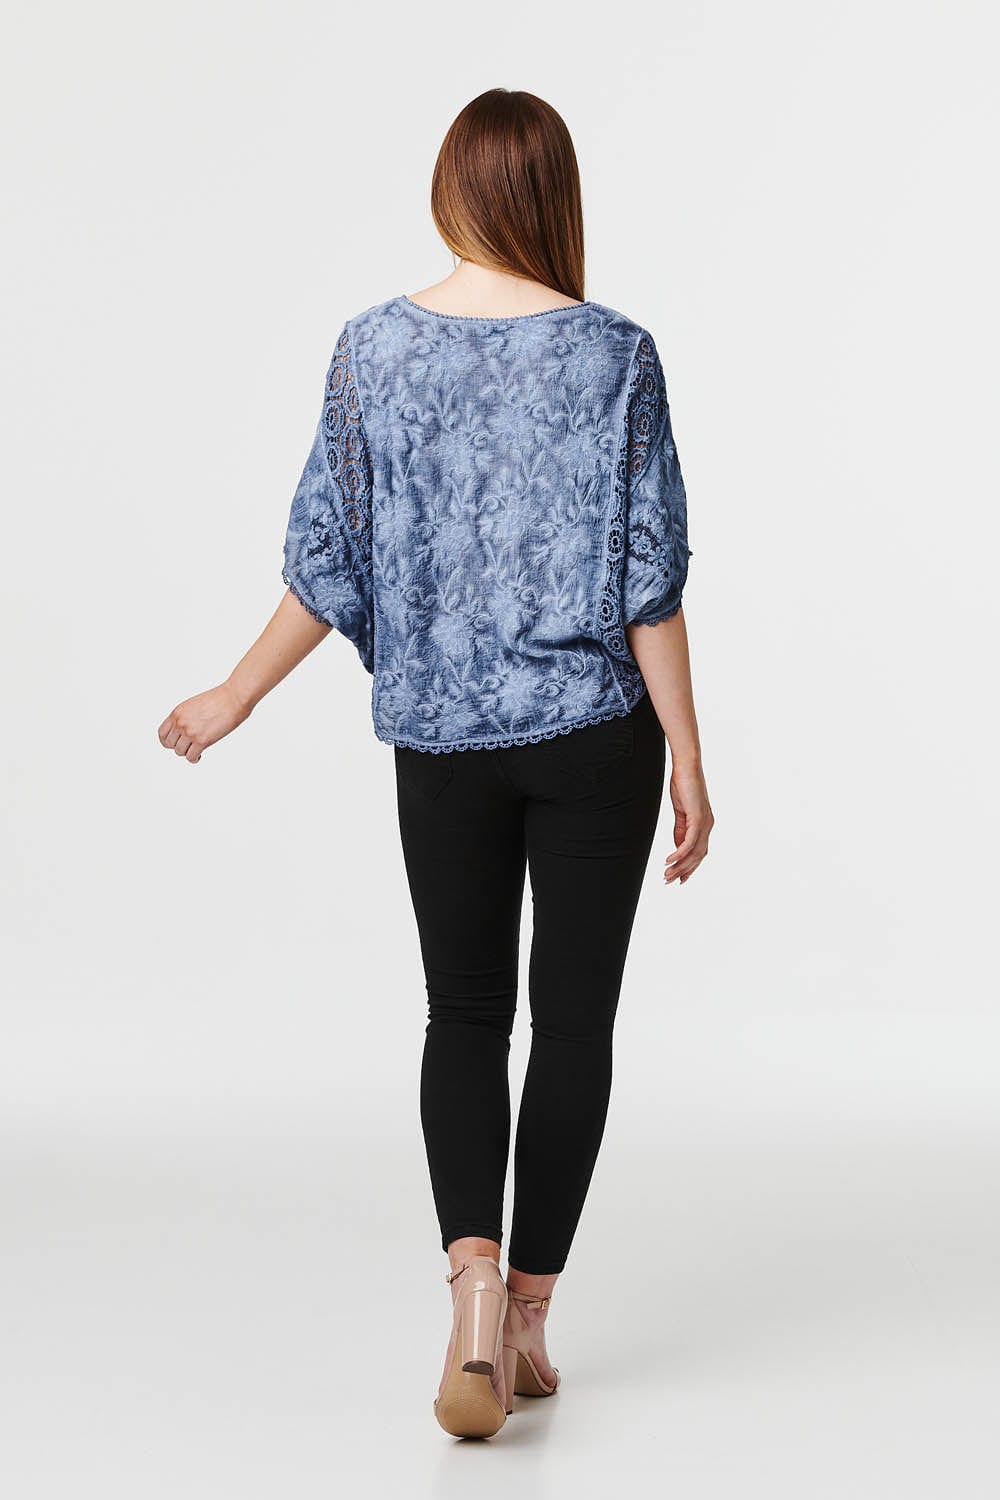 Indigo | Embroidered Lace Batwing Top